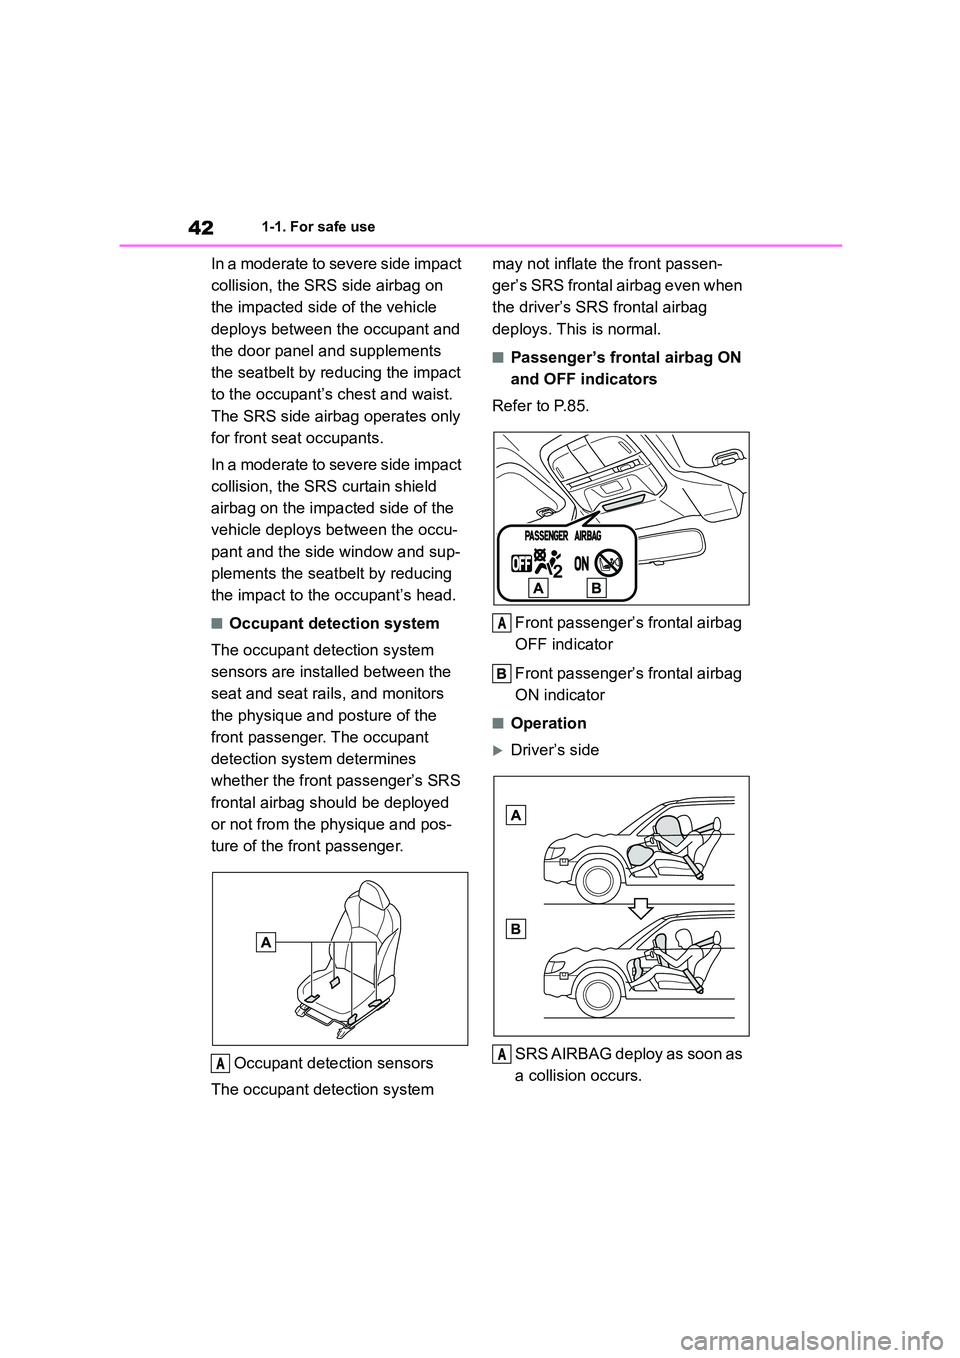 TOYOTA GR86 2022  Owners Manual (in English) 421-1. For safe use
In a moderate to severe side impact  
collision, the SRS side airbag on 
the impacted side of the vehicle 
deploys between the occupant and 
the door panel and supplements 
the sea